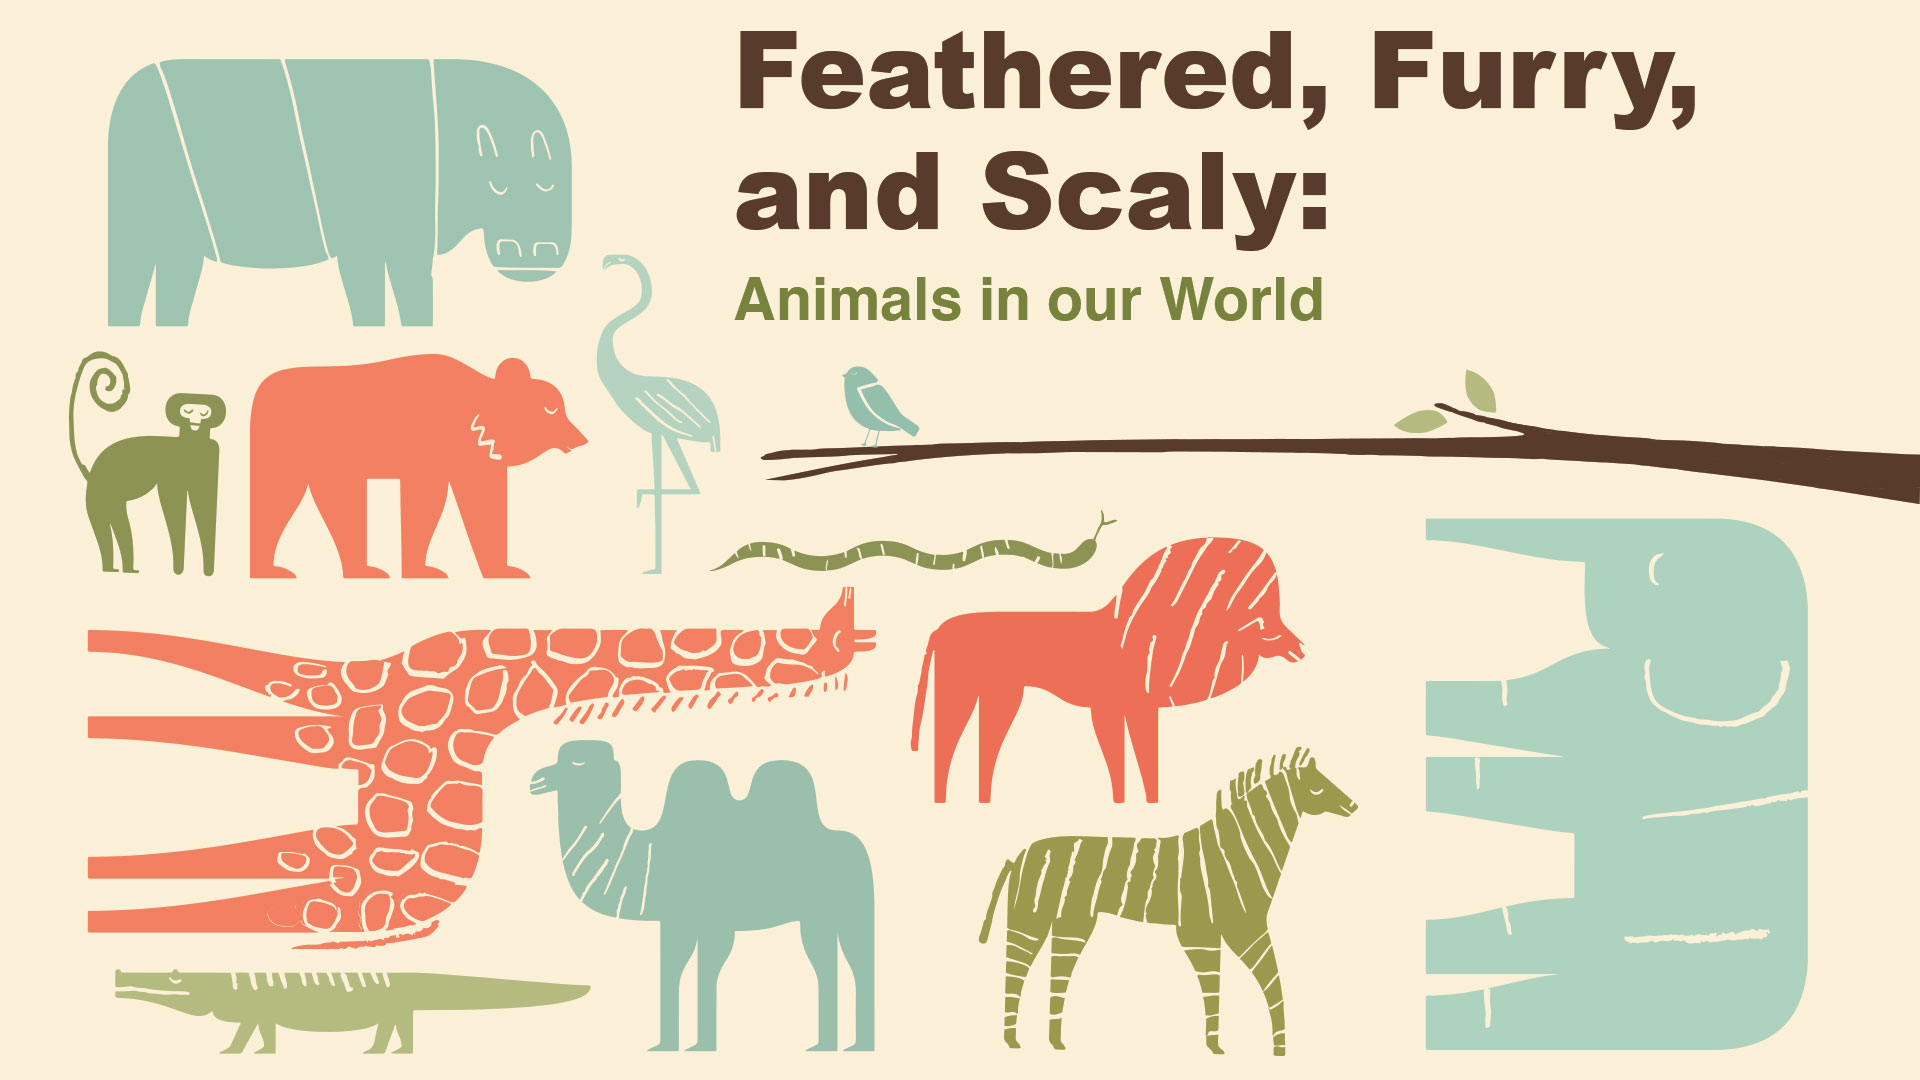 Feathred, Furry, and Scaly: Animals in our World title with stylized blue, green, and red zoo animals